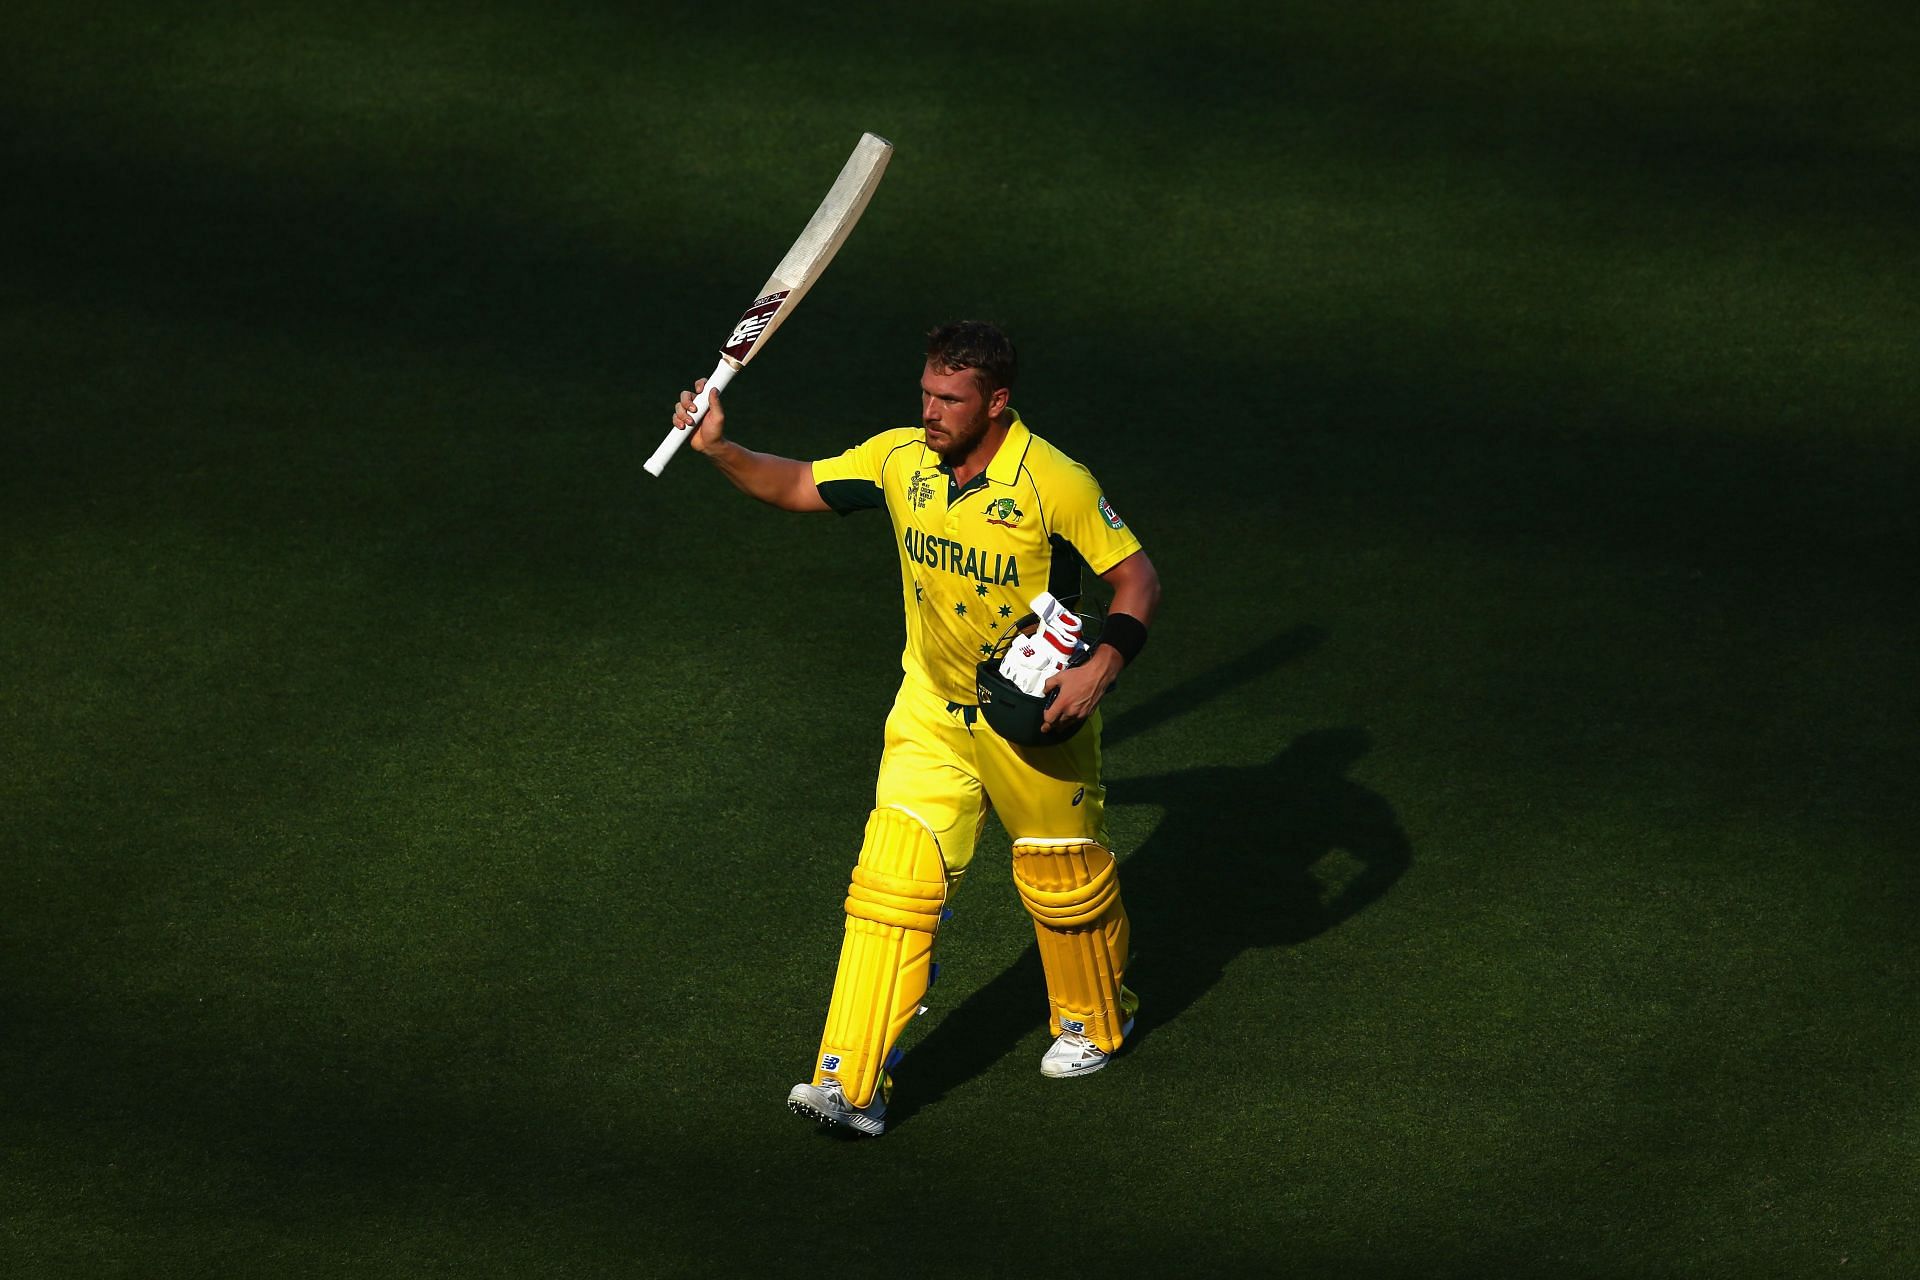 Aaron Finch began the 2019 World Cup on a great note with a century